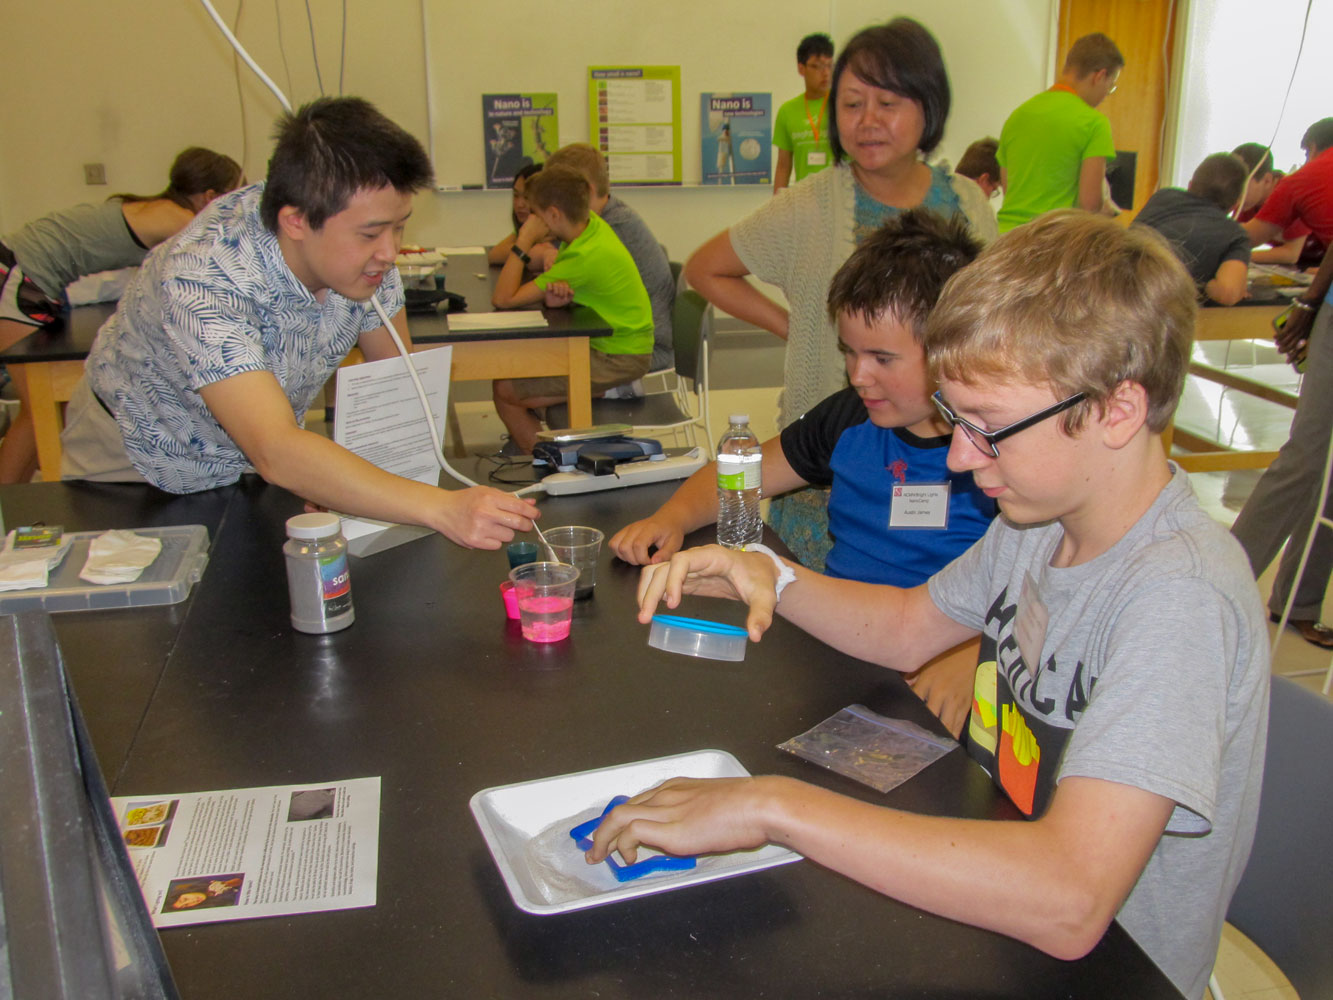 Chuyang Liu (left) and Dr. Yusong Li (right) teaching middle school students about Nano Sand.